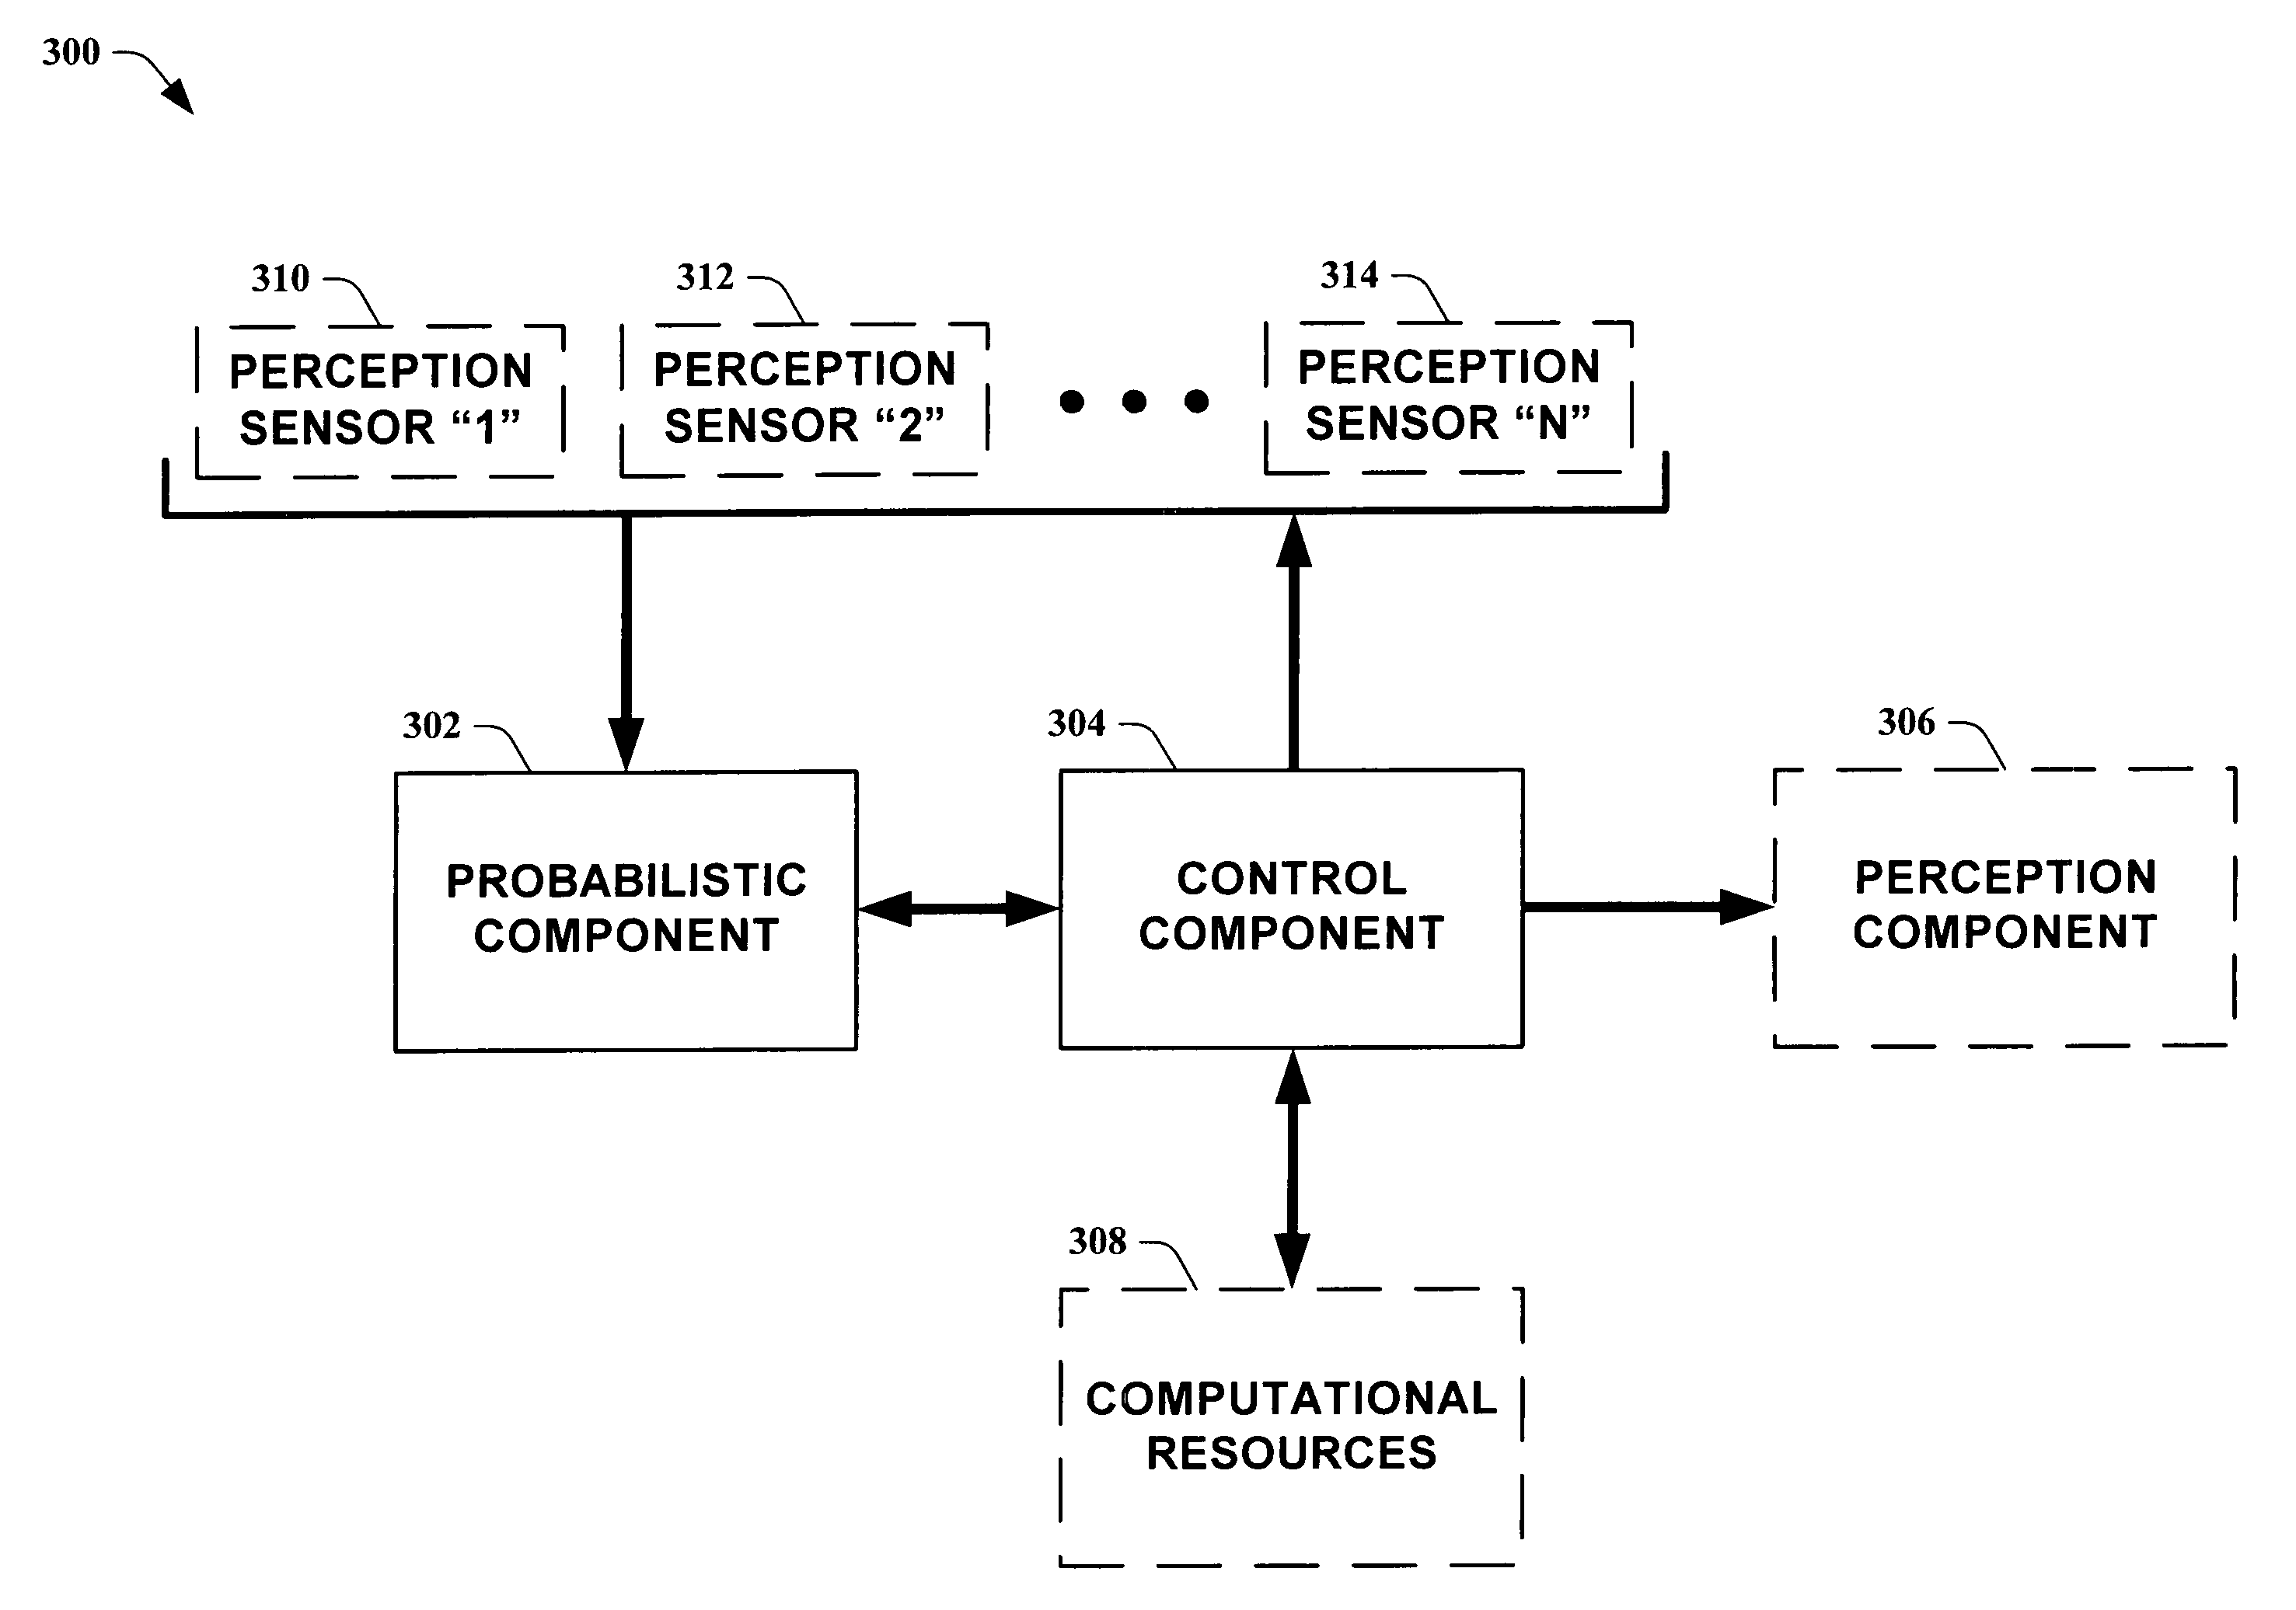 Systems and methods for guiding allocation of computational resources in automated perceptual systems